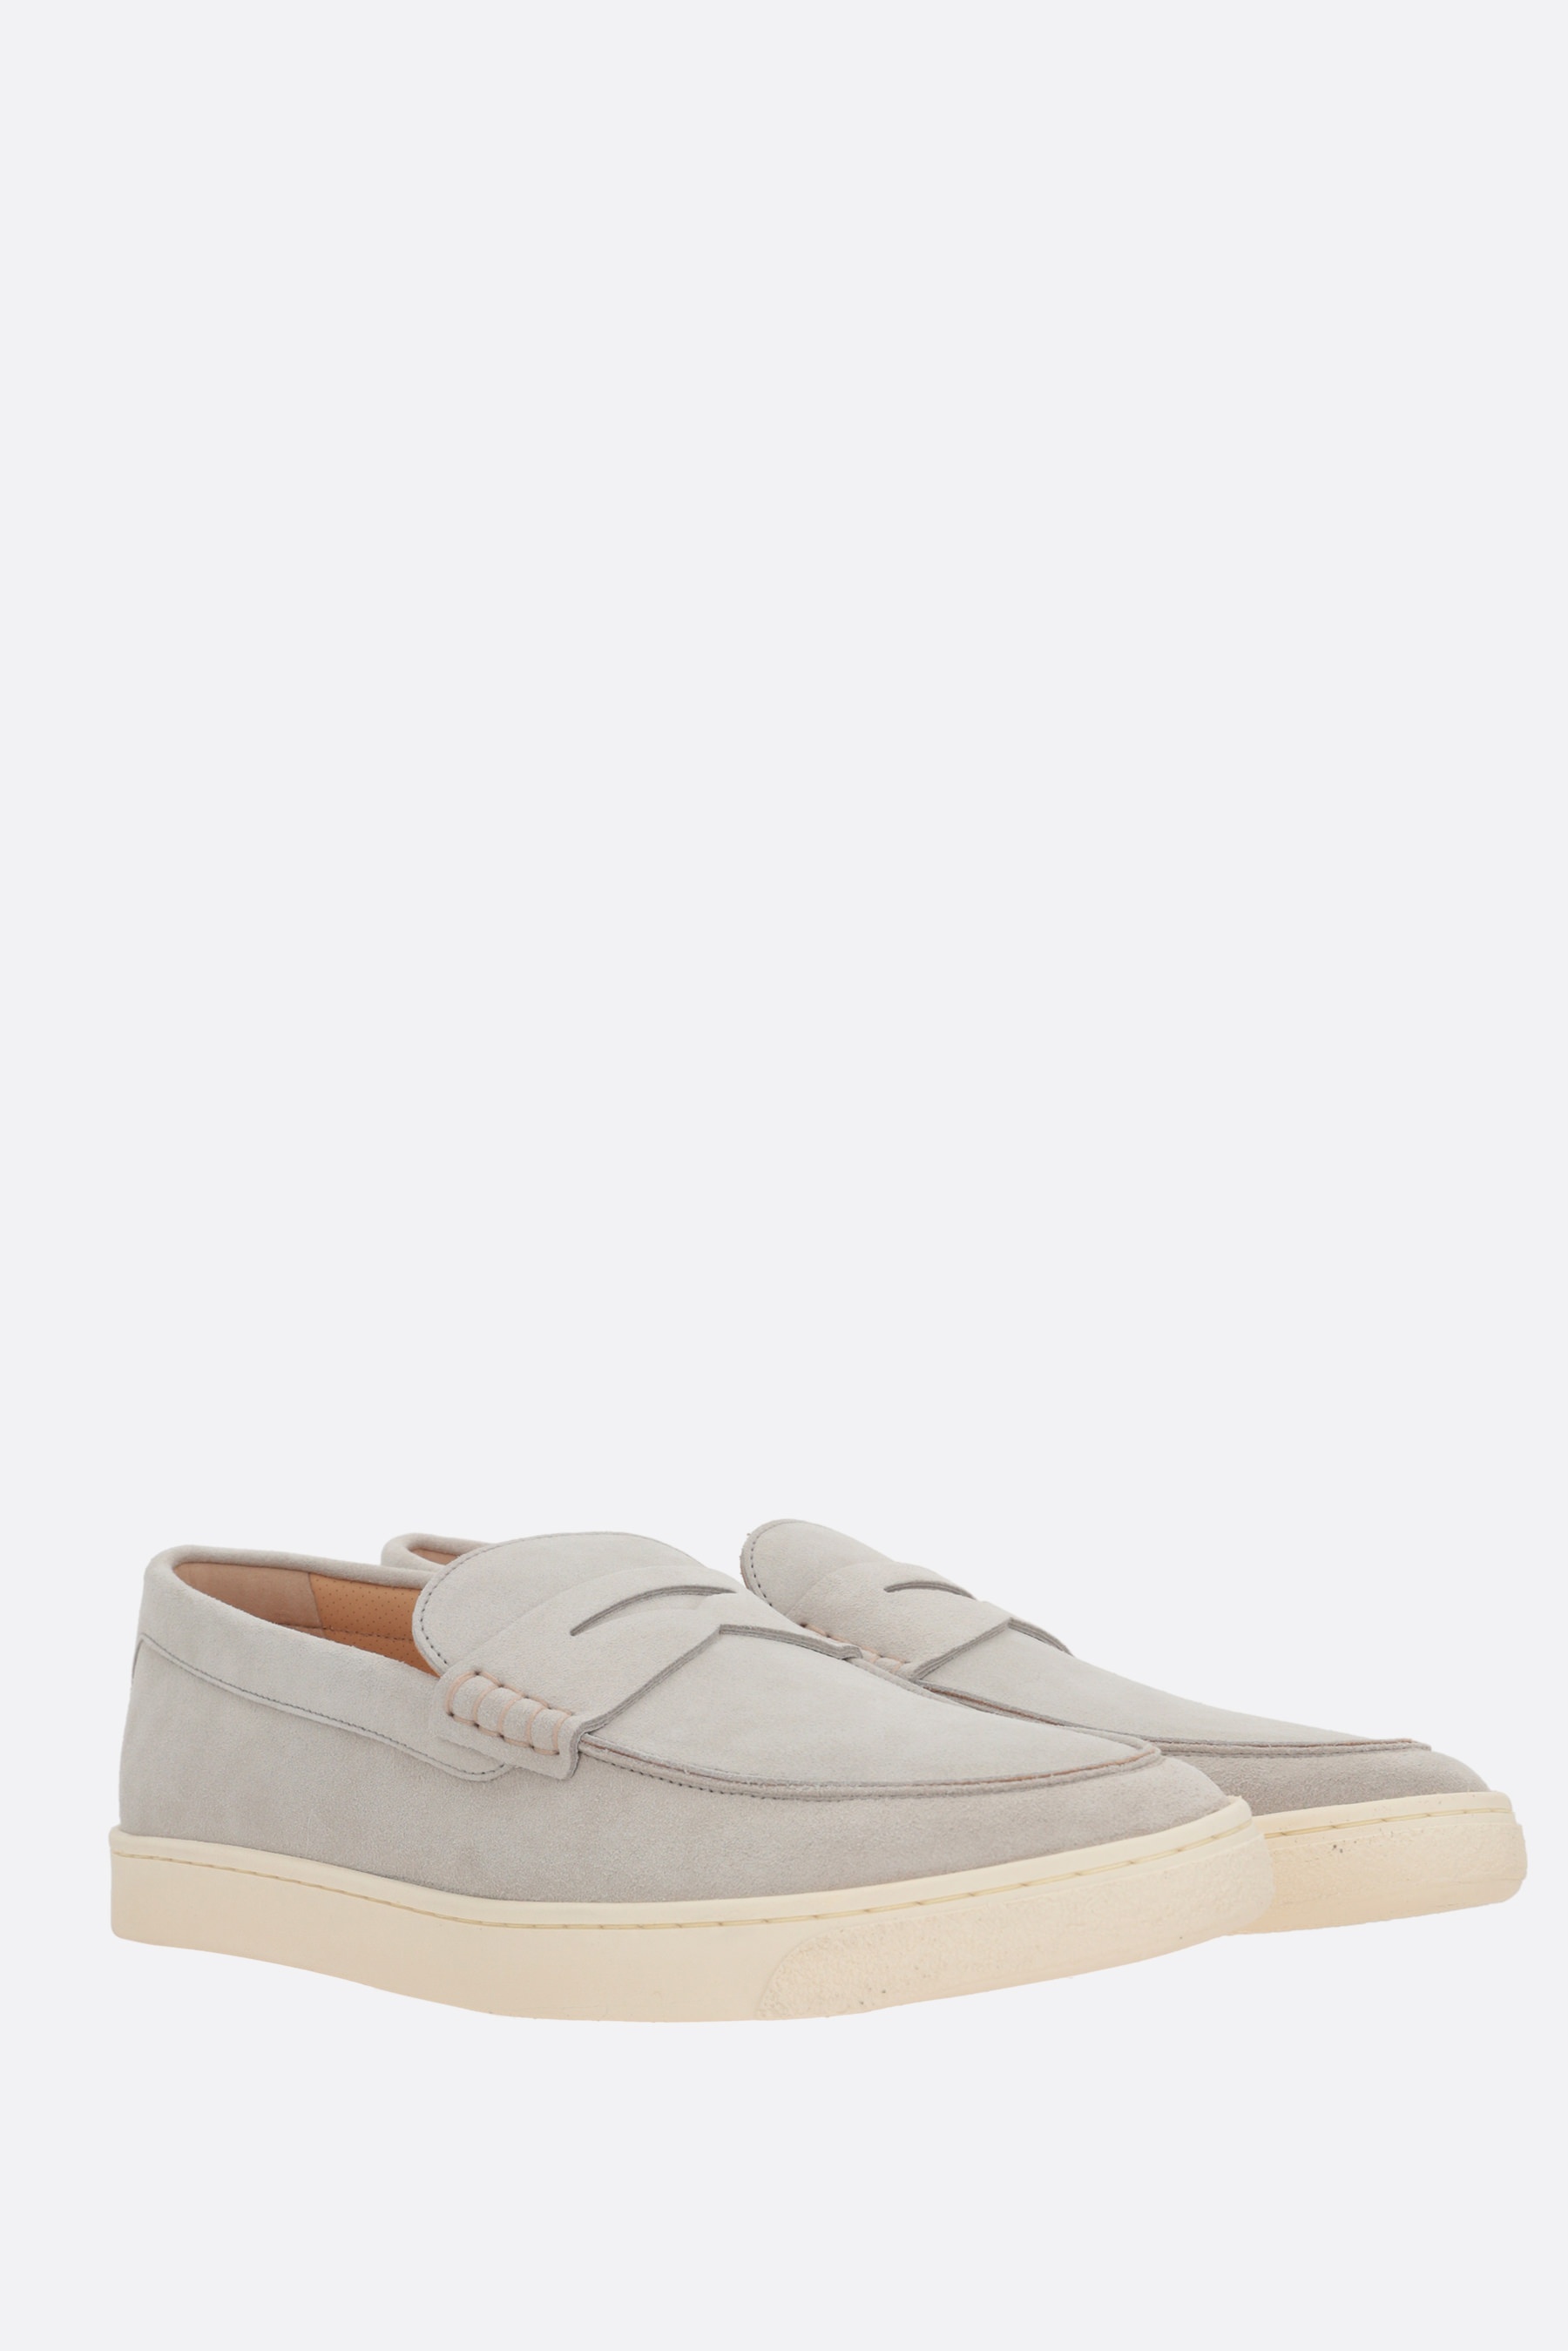 SUEDE LOAFERS - 2